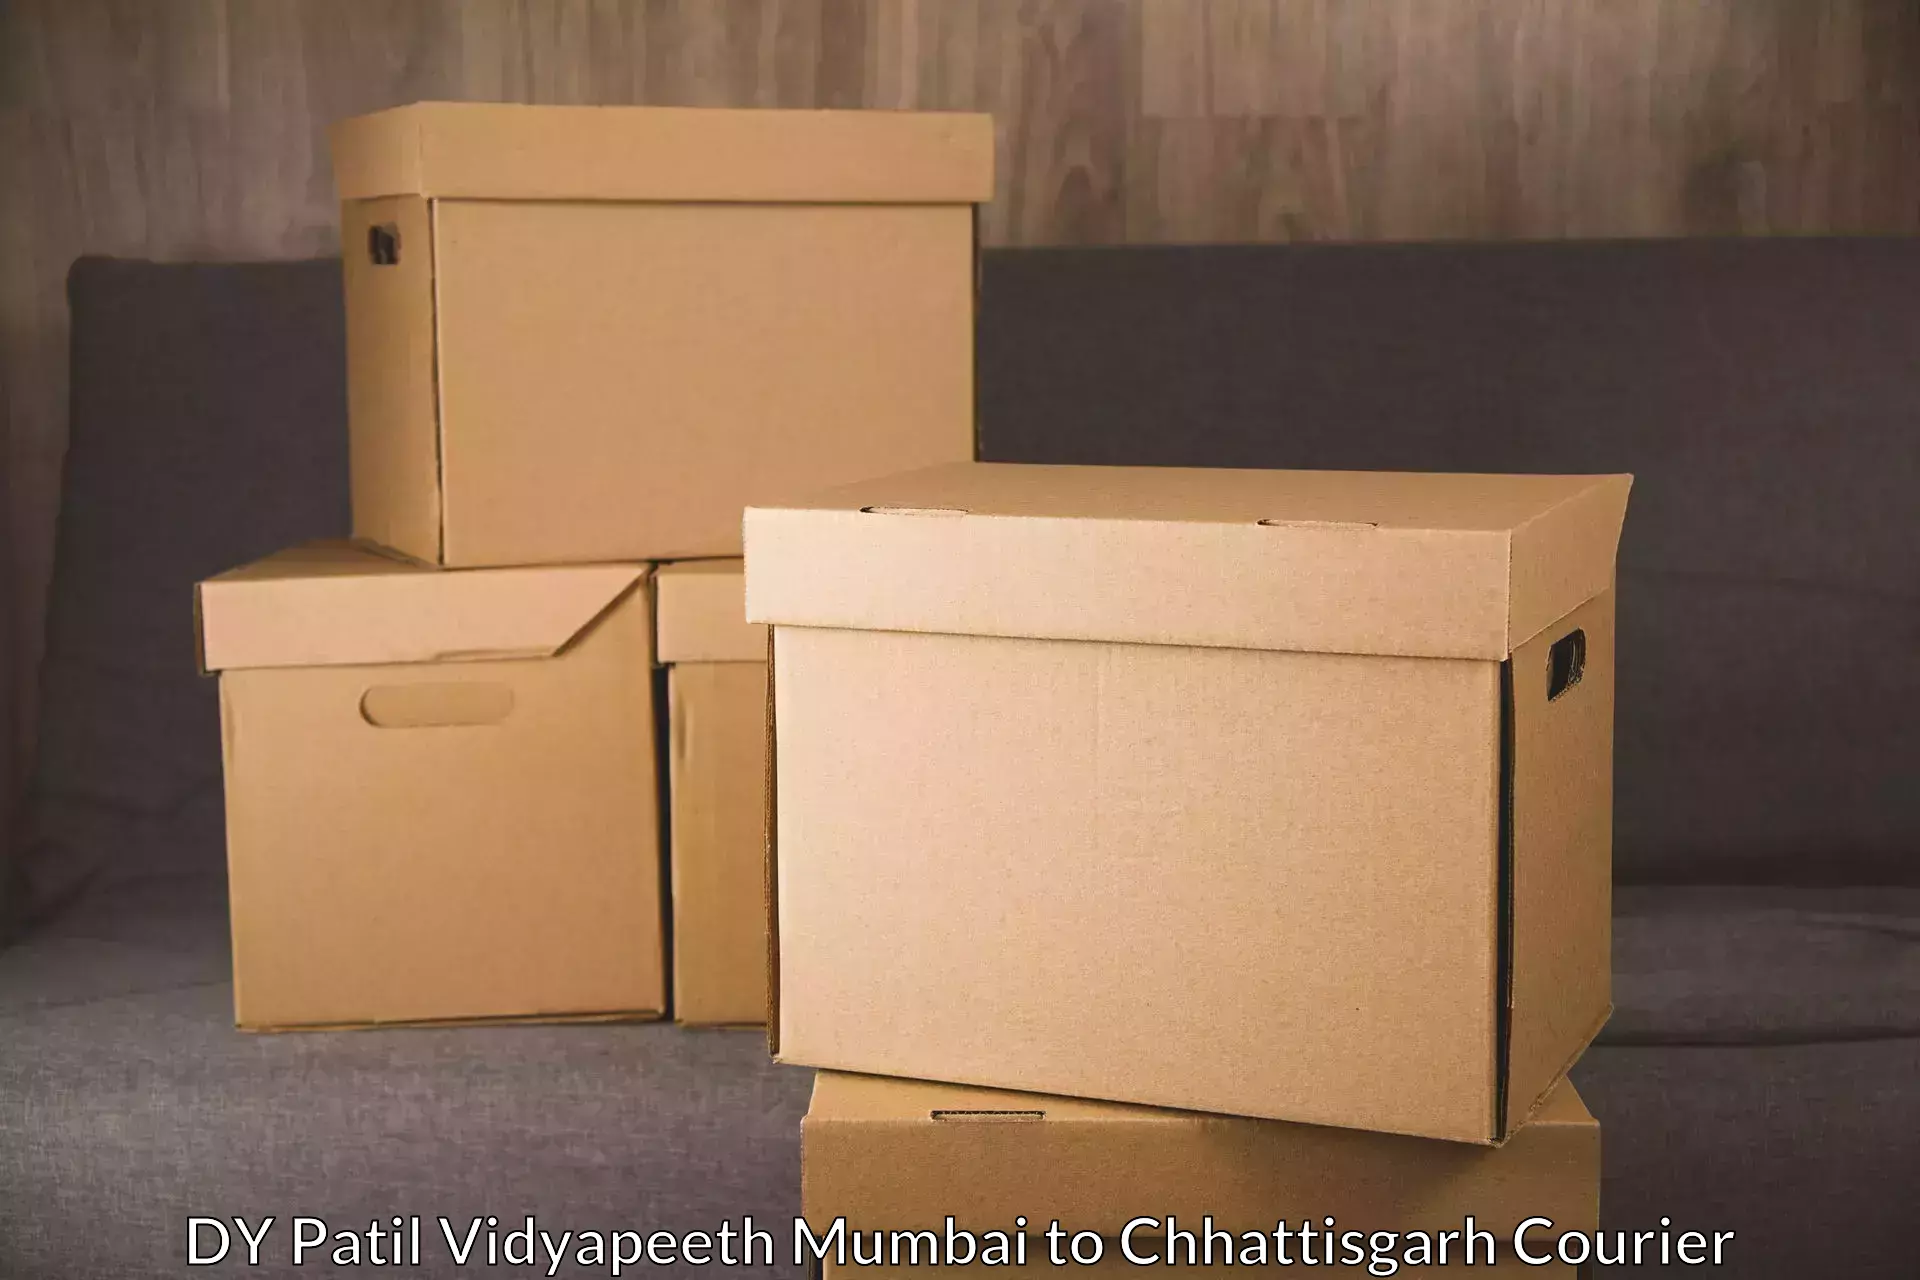 Medical delivery services in DY Patil Vidyapeeth Mumbai to Chhattisgarh